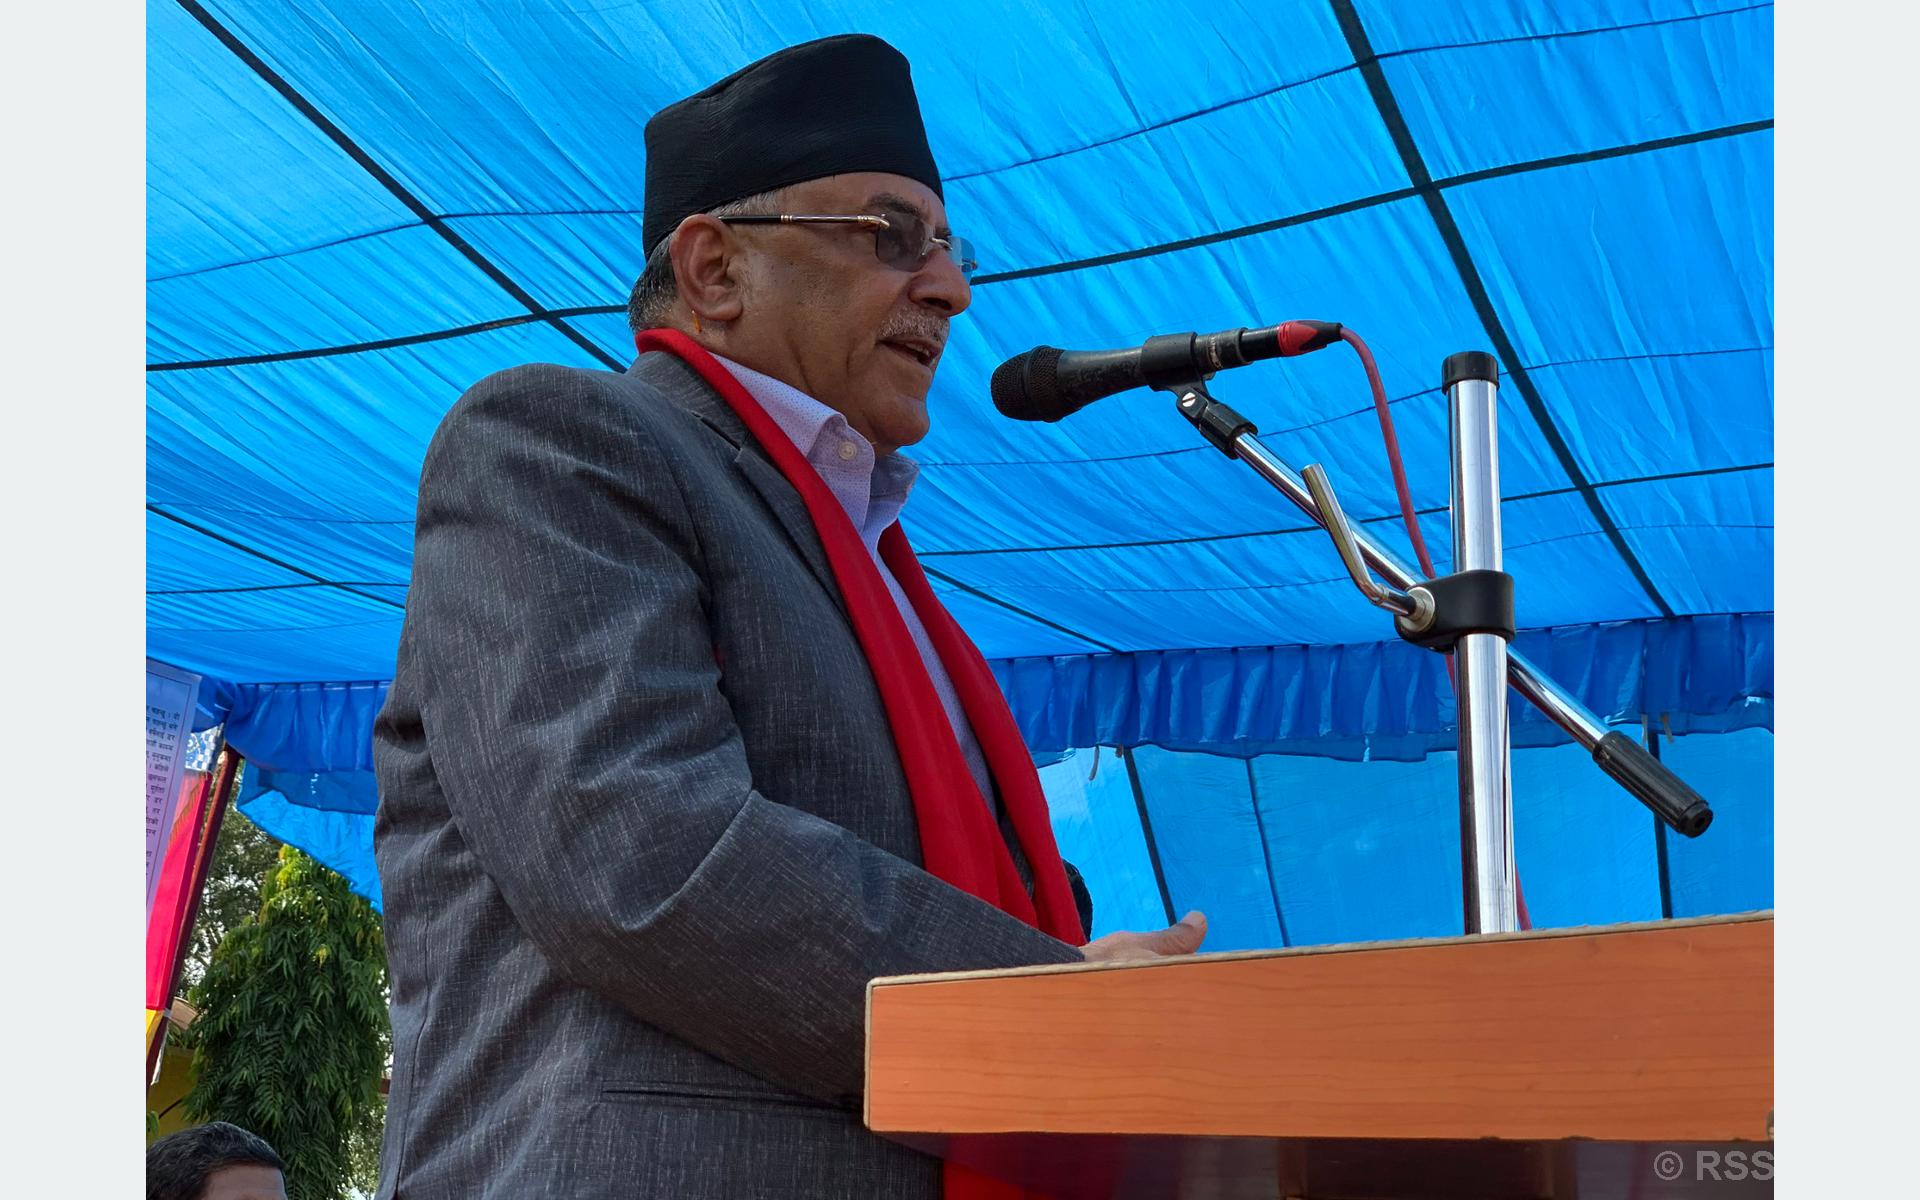 Nepal will secure multidimensional benefits from Xi’s visit: Dahal